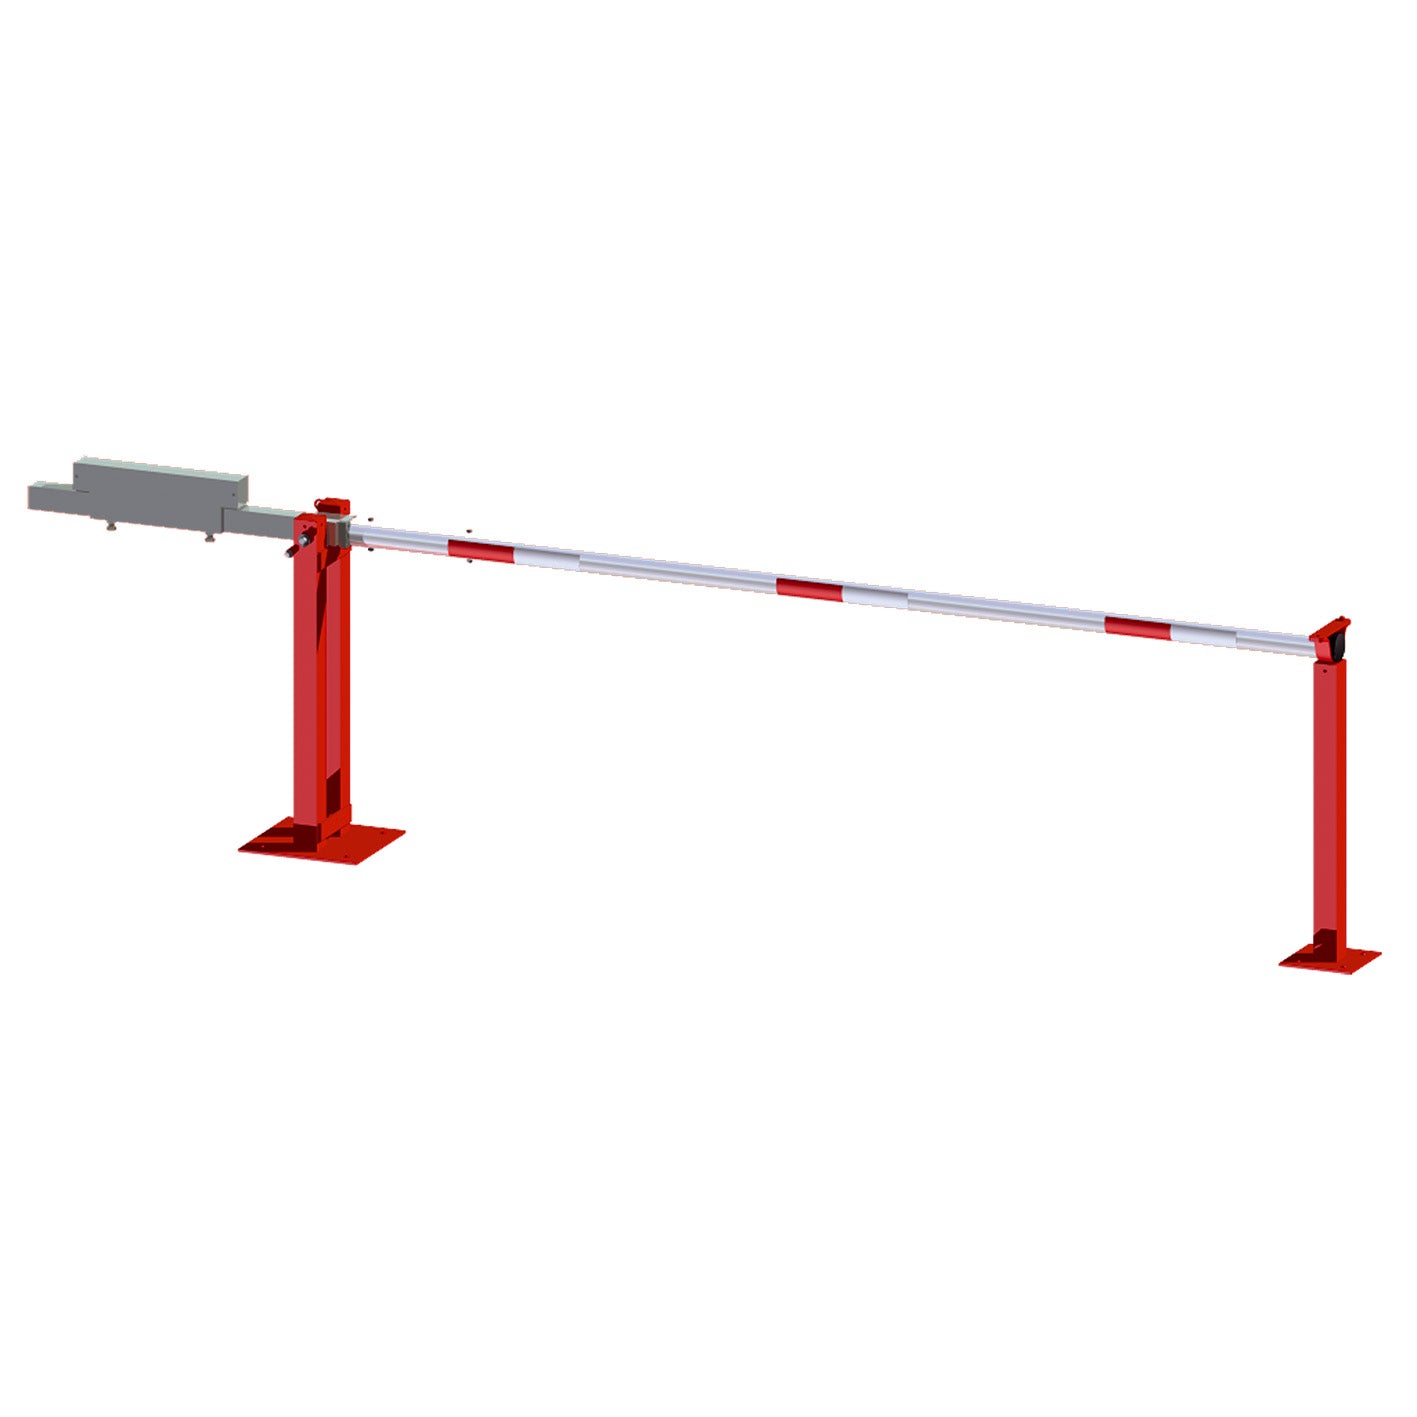 Access Barrier with Counterweight and Fixed Post